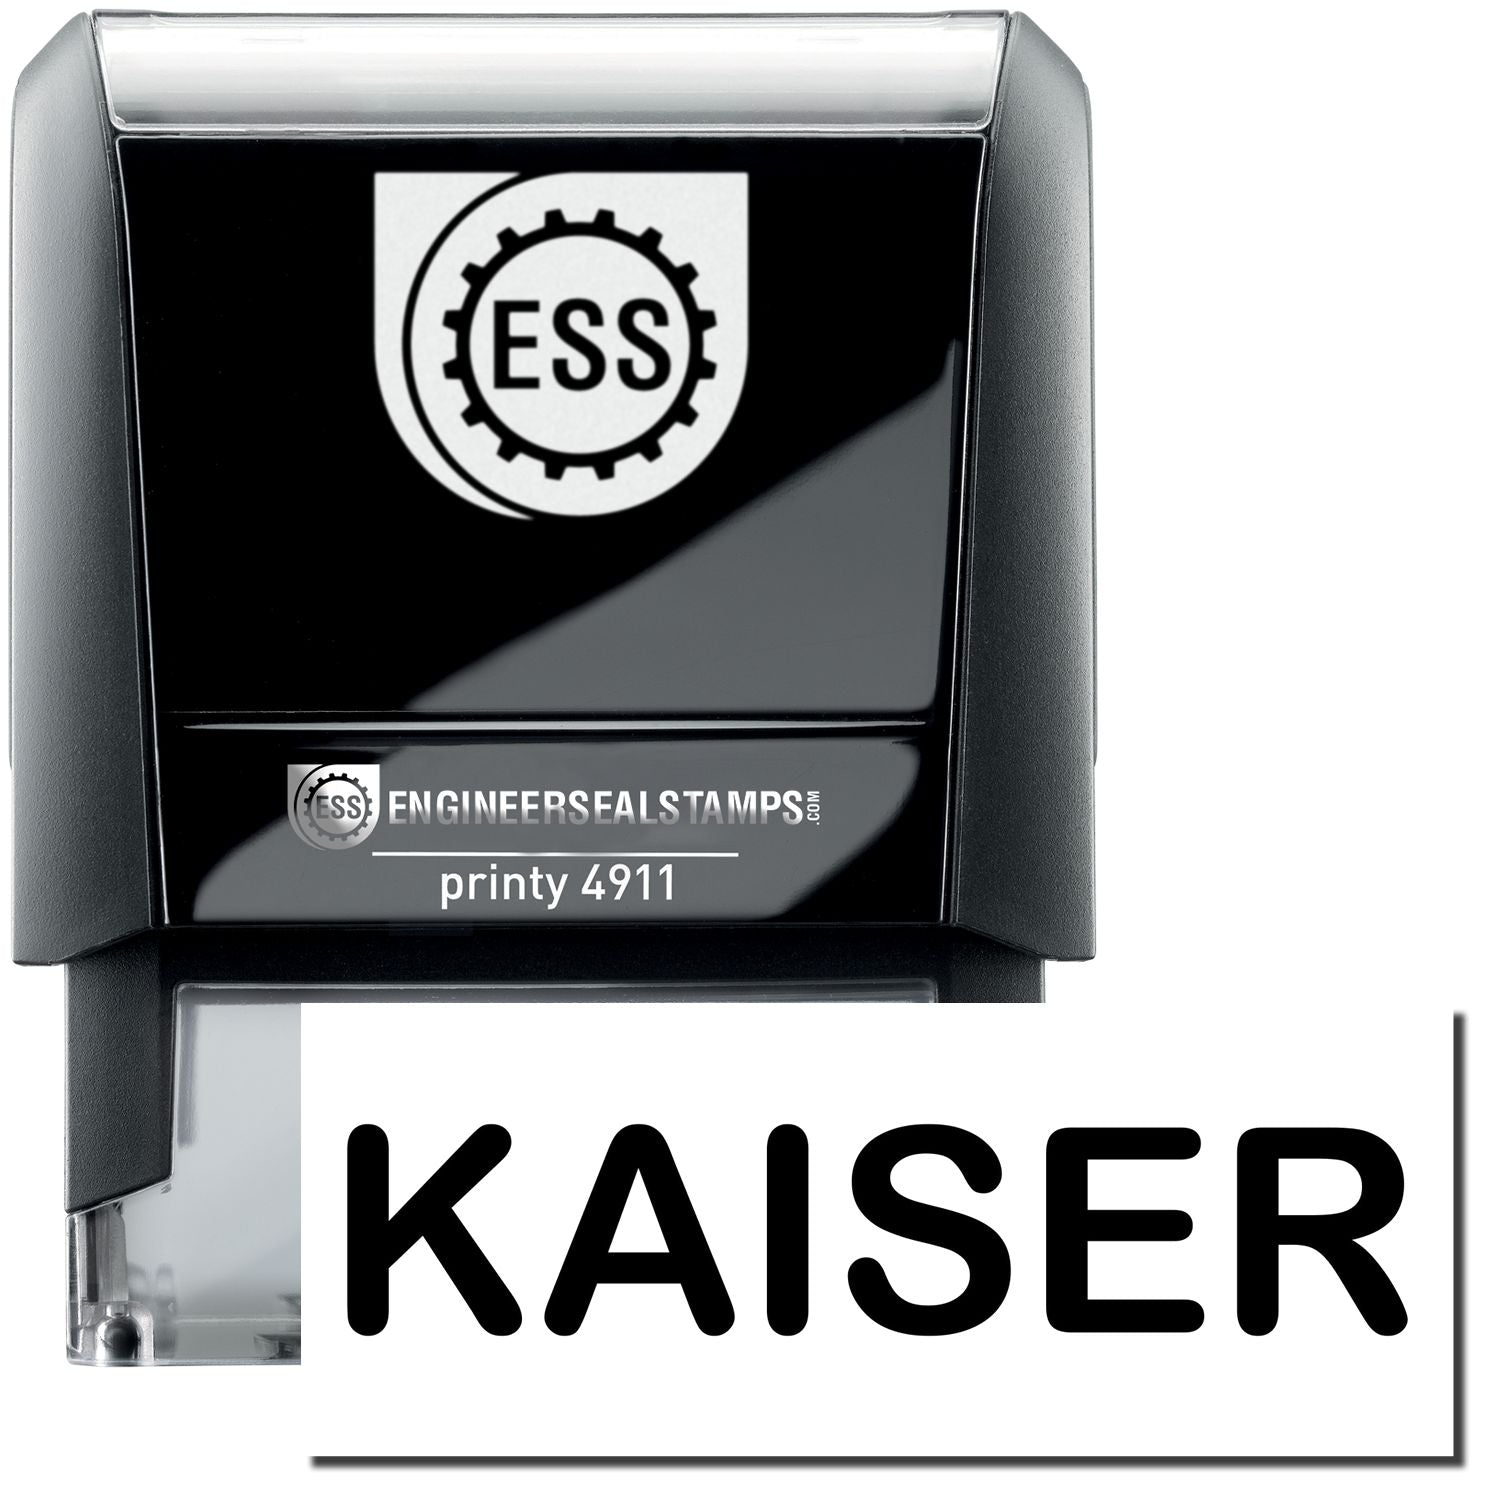 A self-inking stamp with a stamped image showing how the text "KAISER" is displayed after stamping.